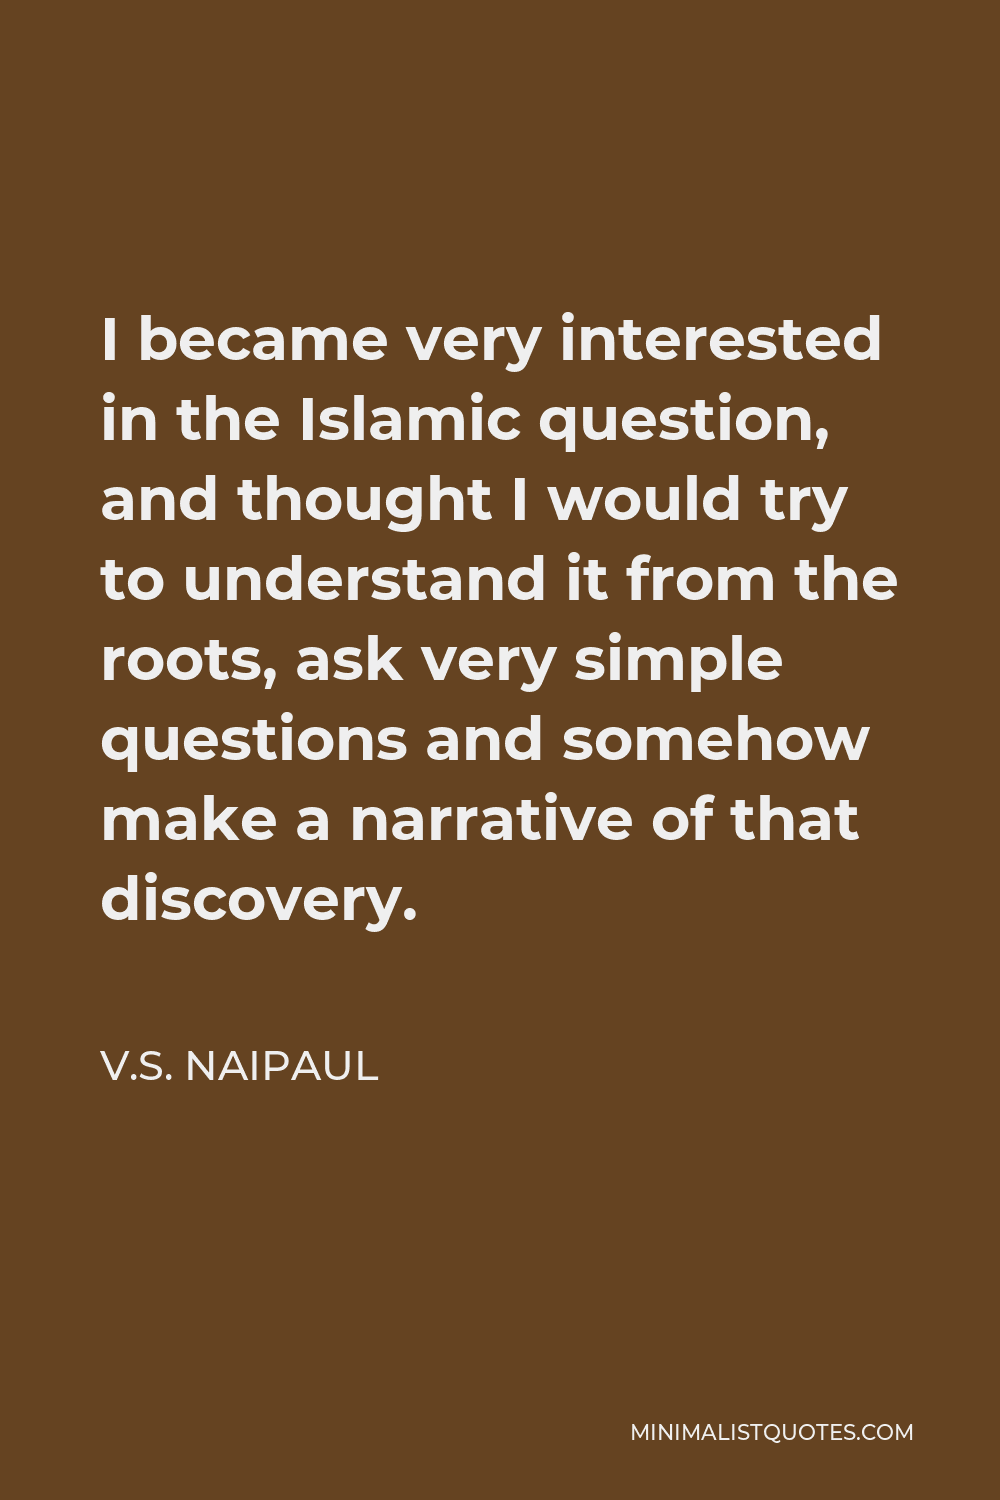 V.S. Naipaul Quote - I became very interested in the Islamic question, and thought I would try to understand it from the roots, ask very simple questions and somehow make a narrative of that discovery.